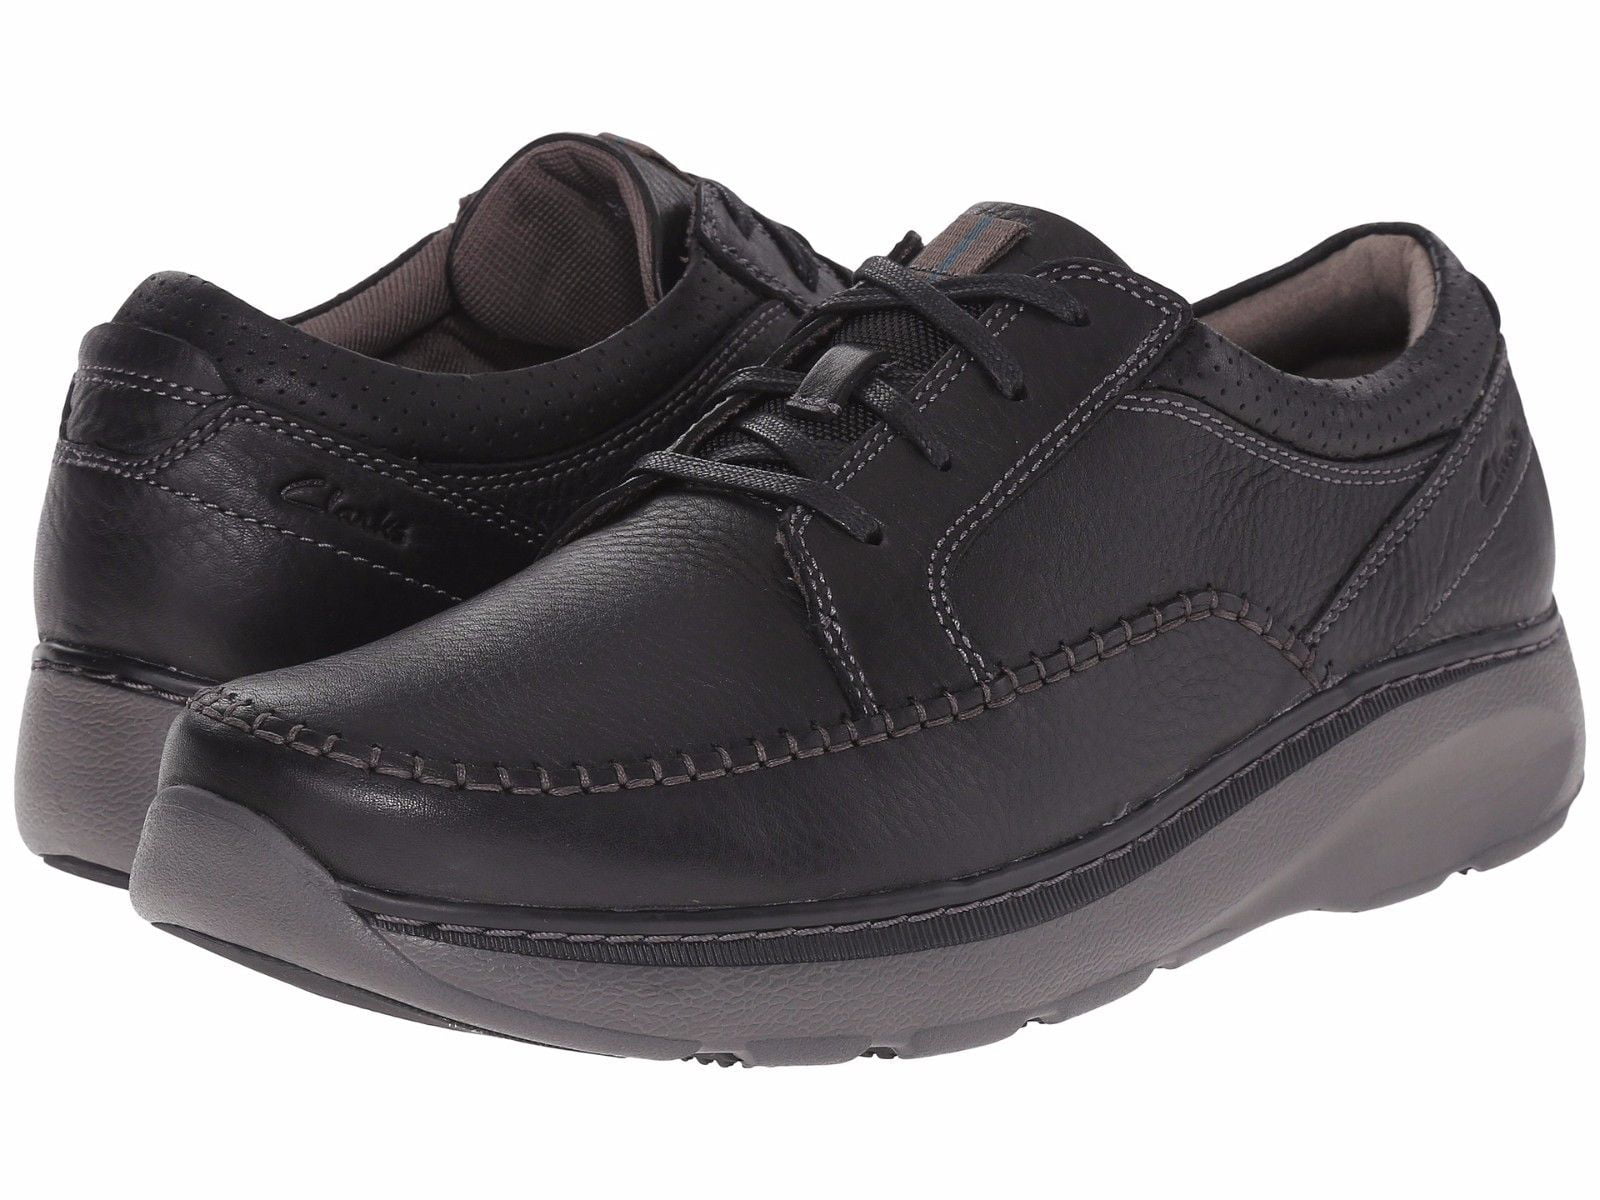 Mens Clarks Charton Vibe Casual Lace Up Shoes